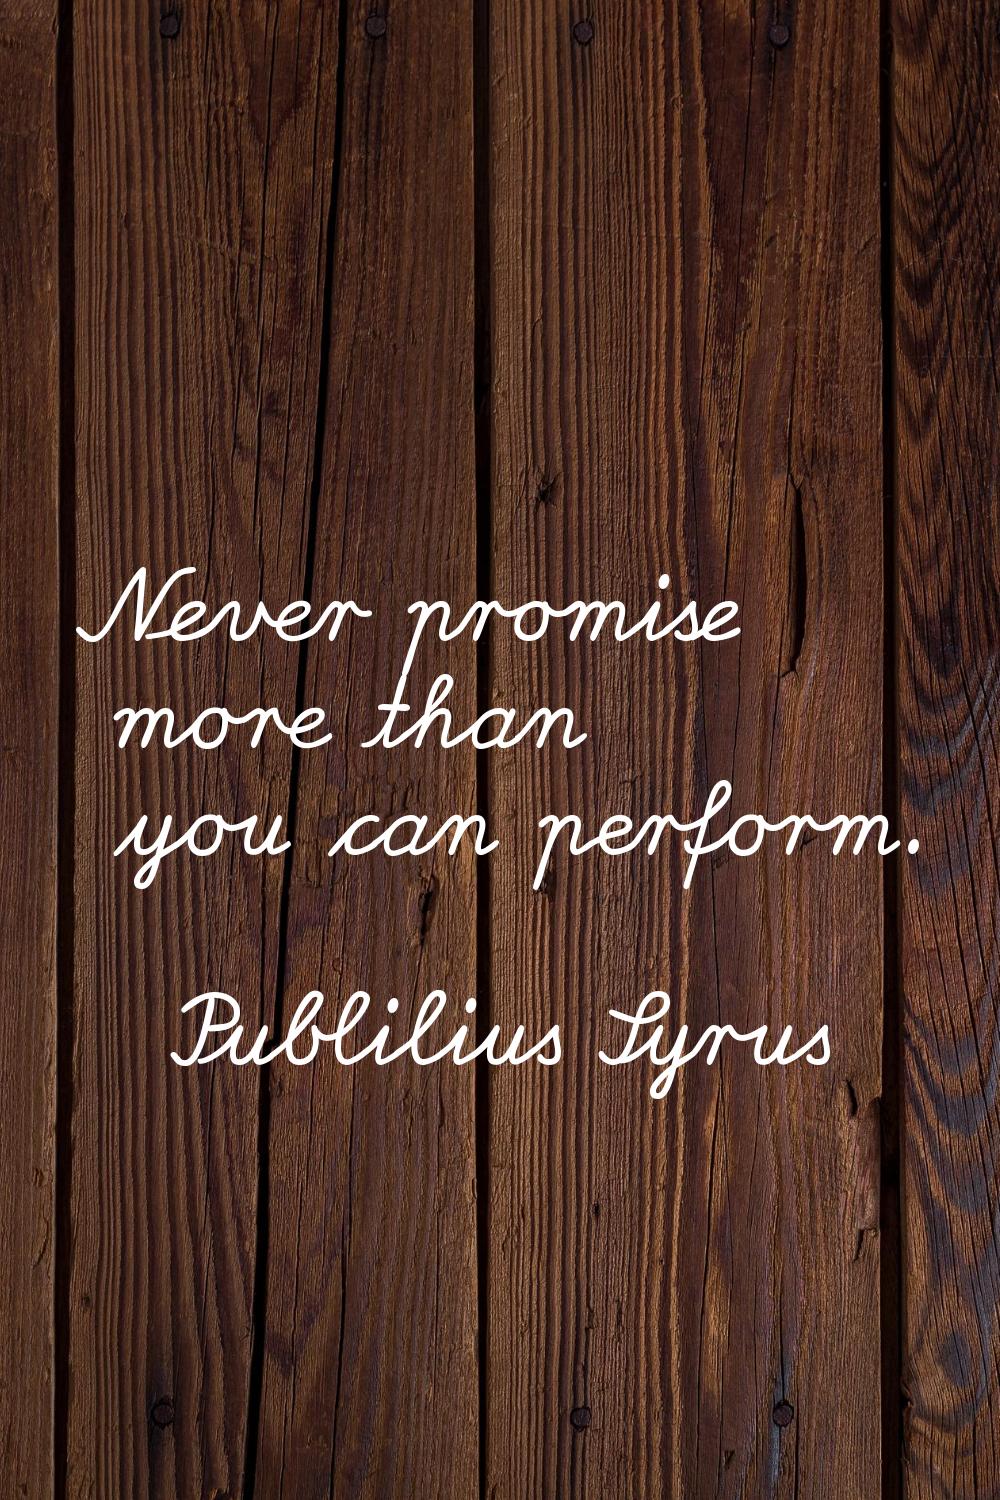 Never promise more than you can perform.